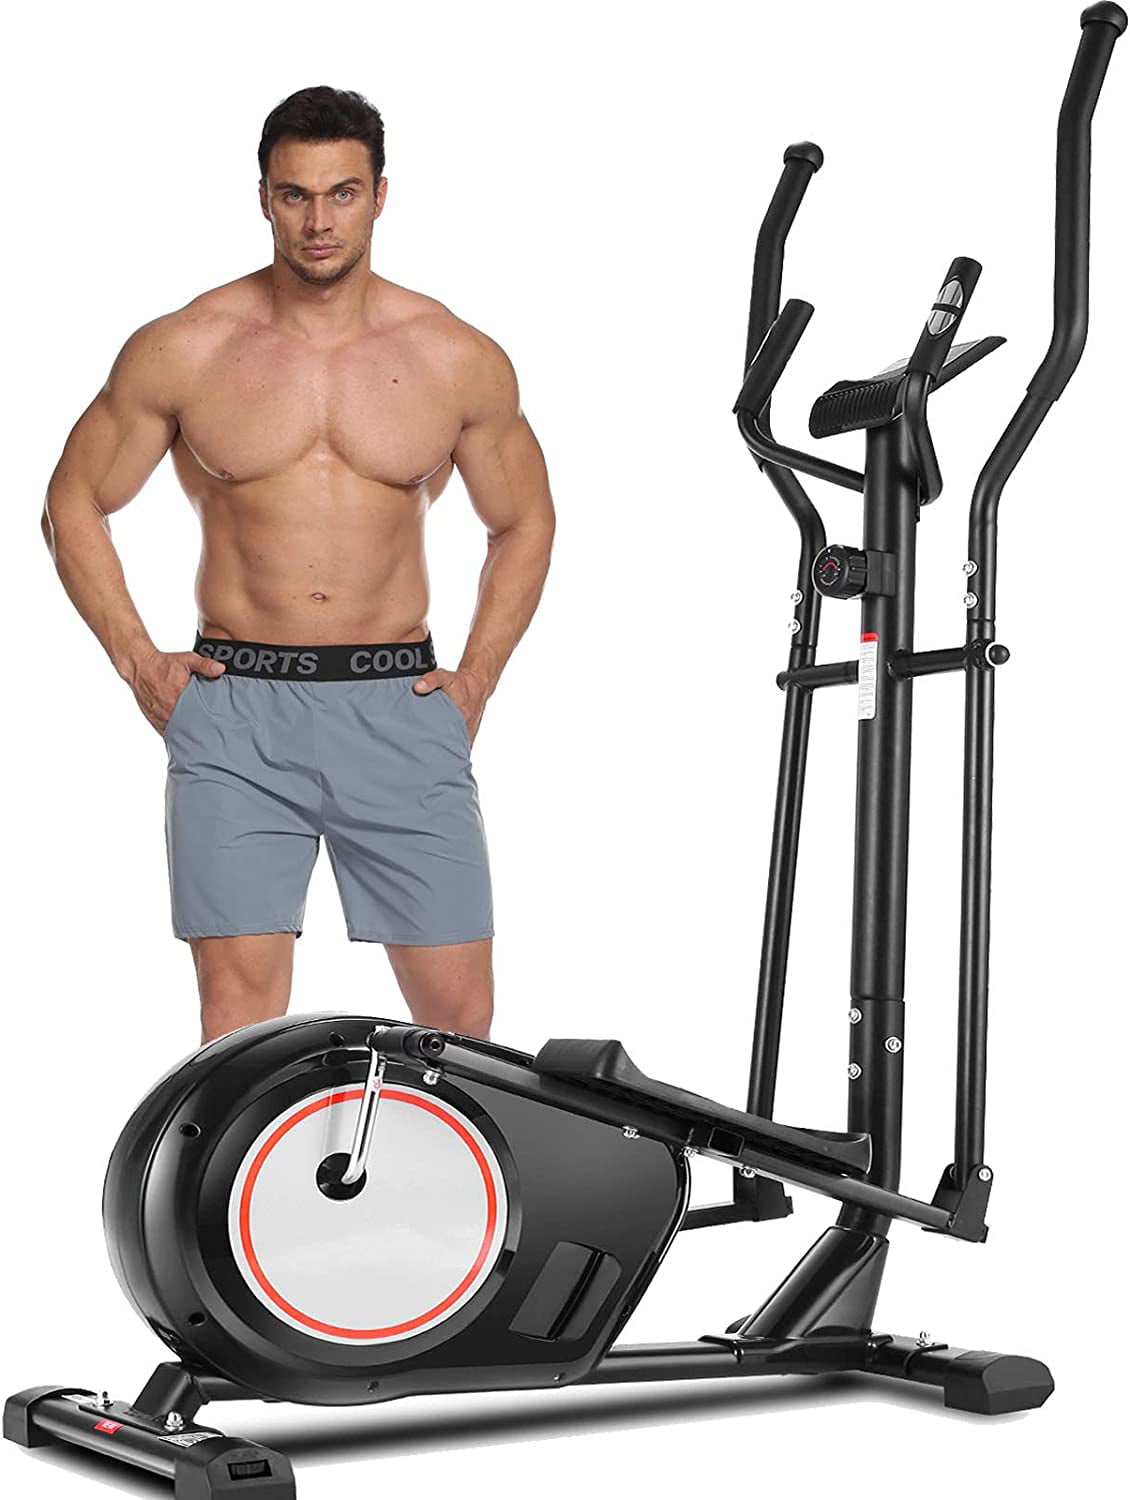 ANCHEER Elliptical Machine Magnetic Training Machine for Home Use 